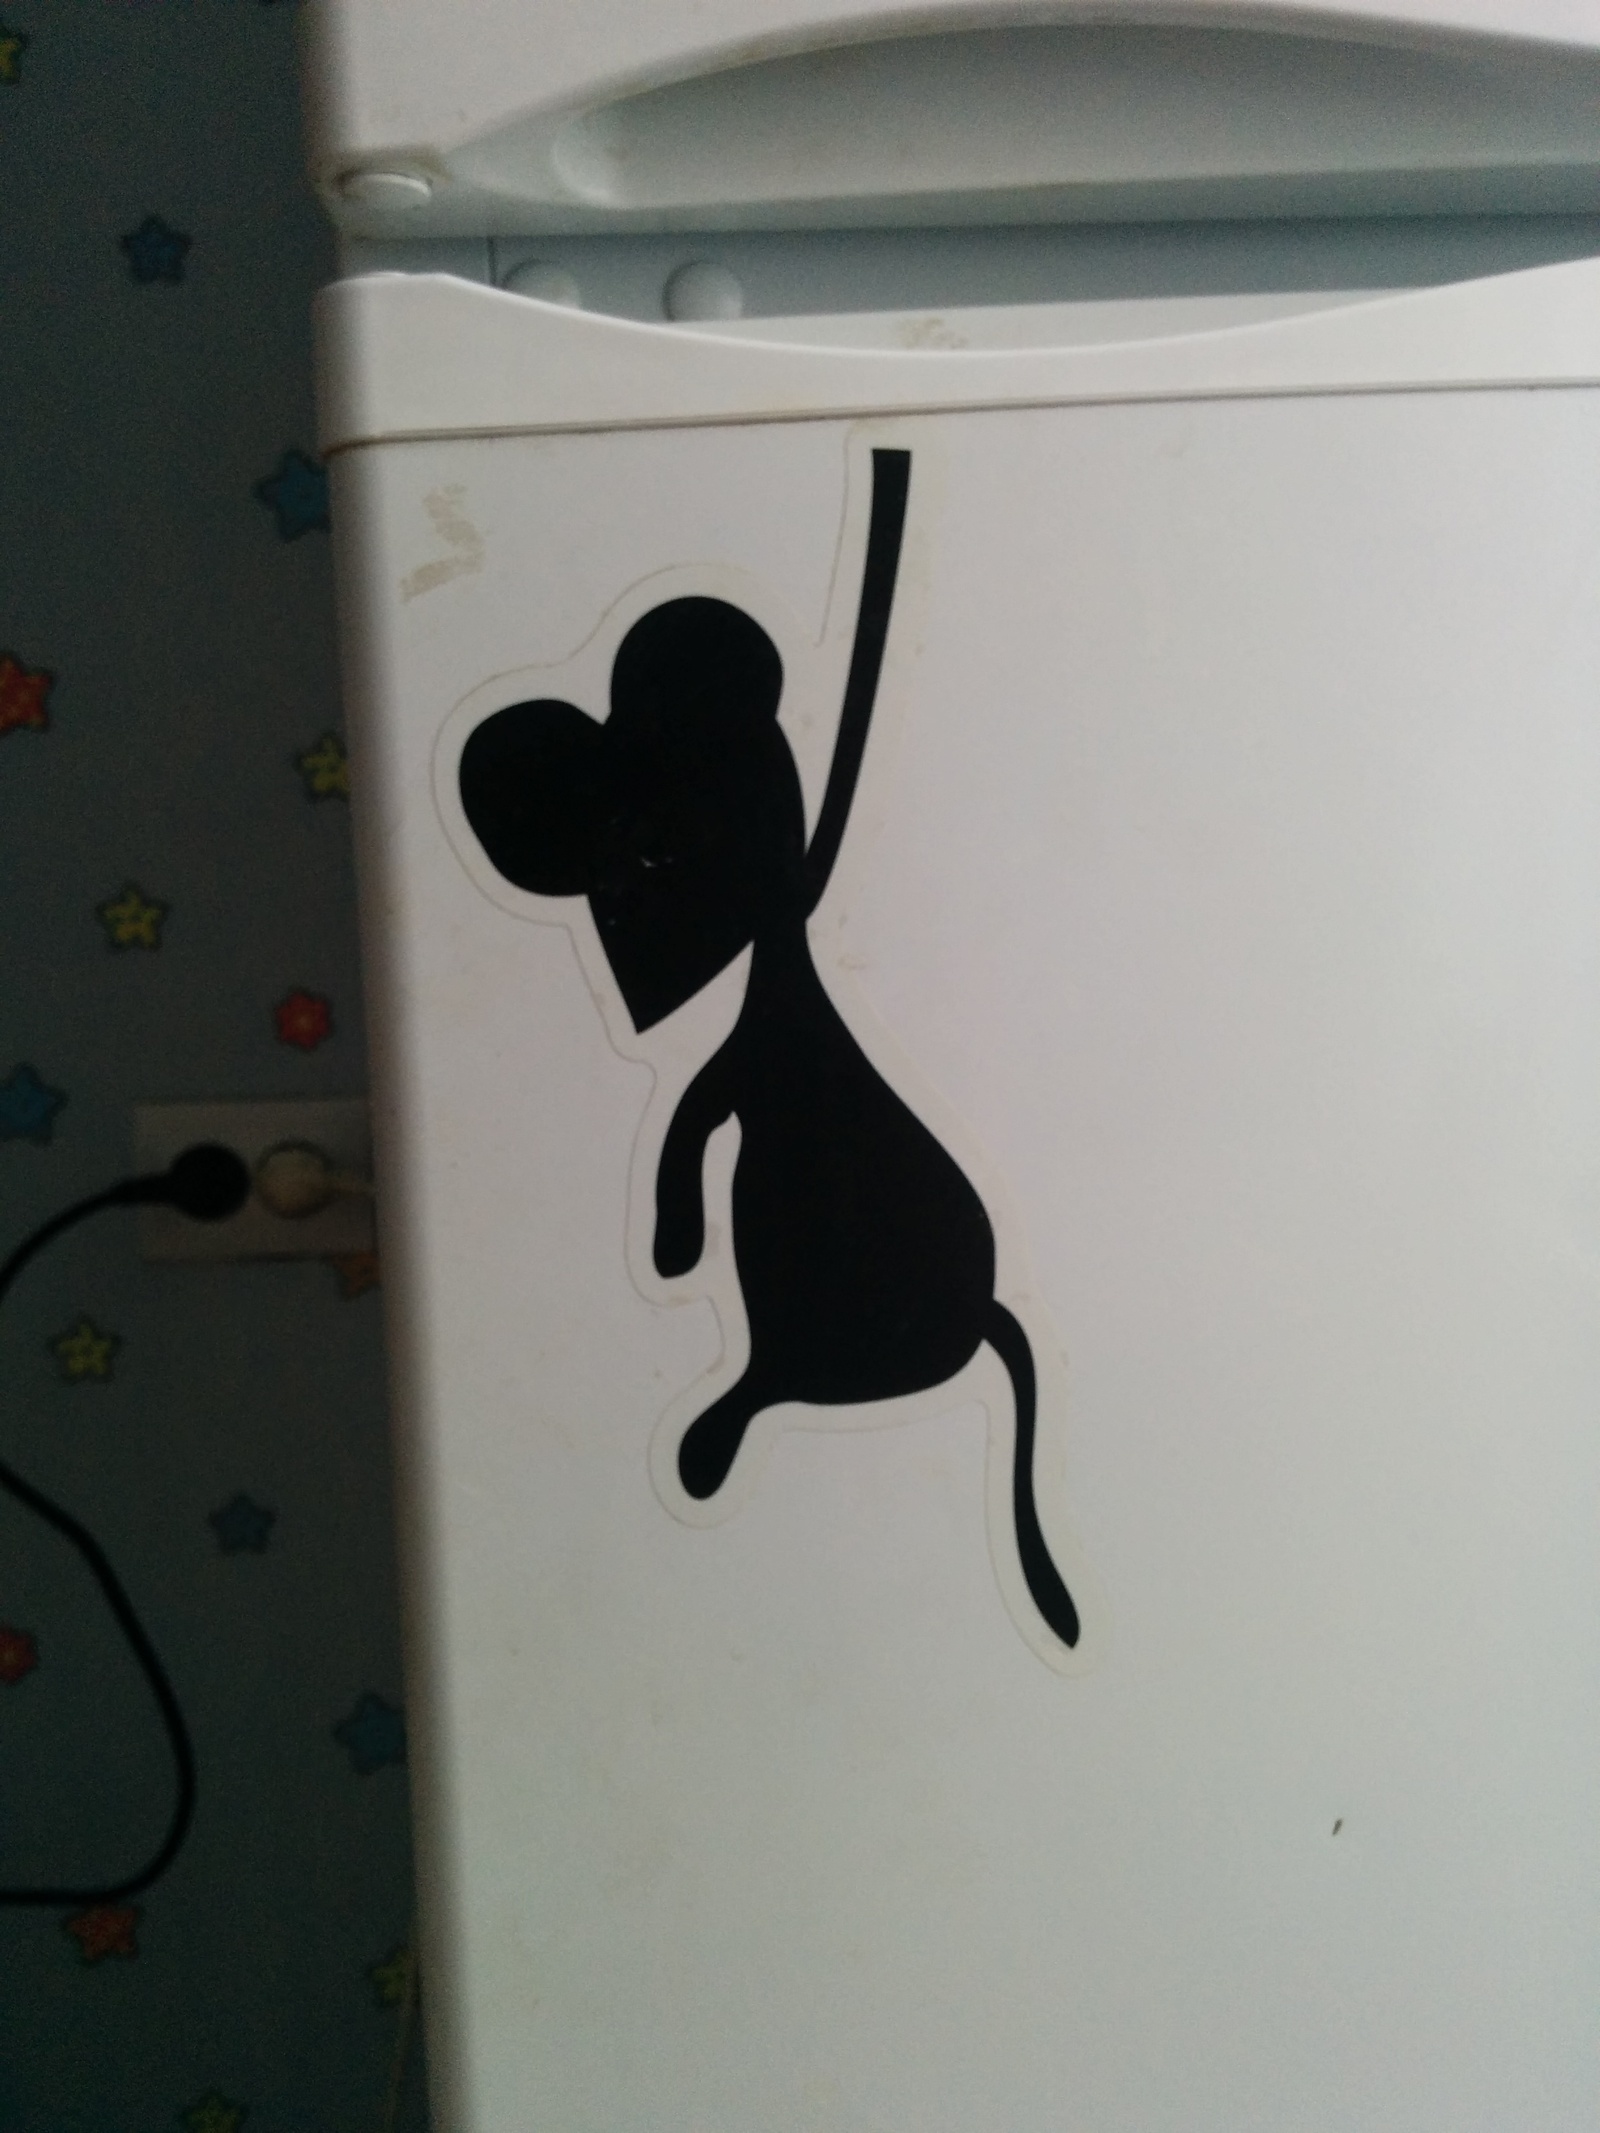 How to unsee this? - My, Sticker, Mouse, Refrigerator, How to unsee it